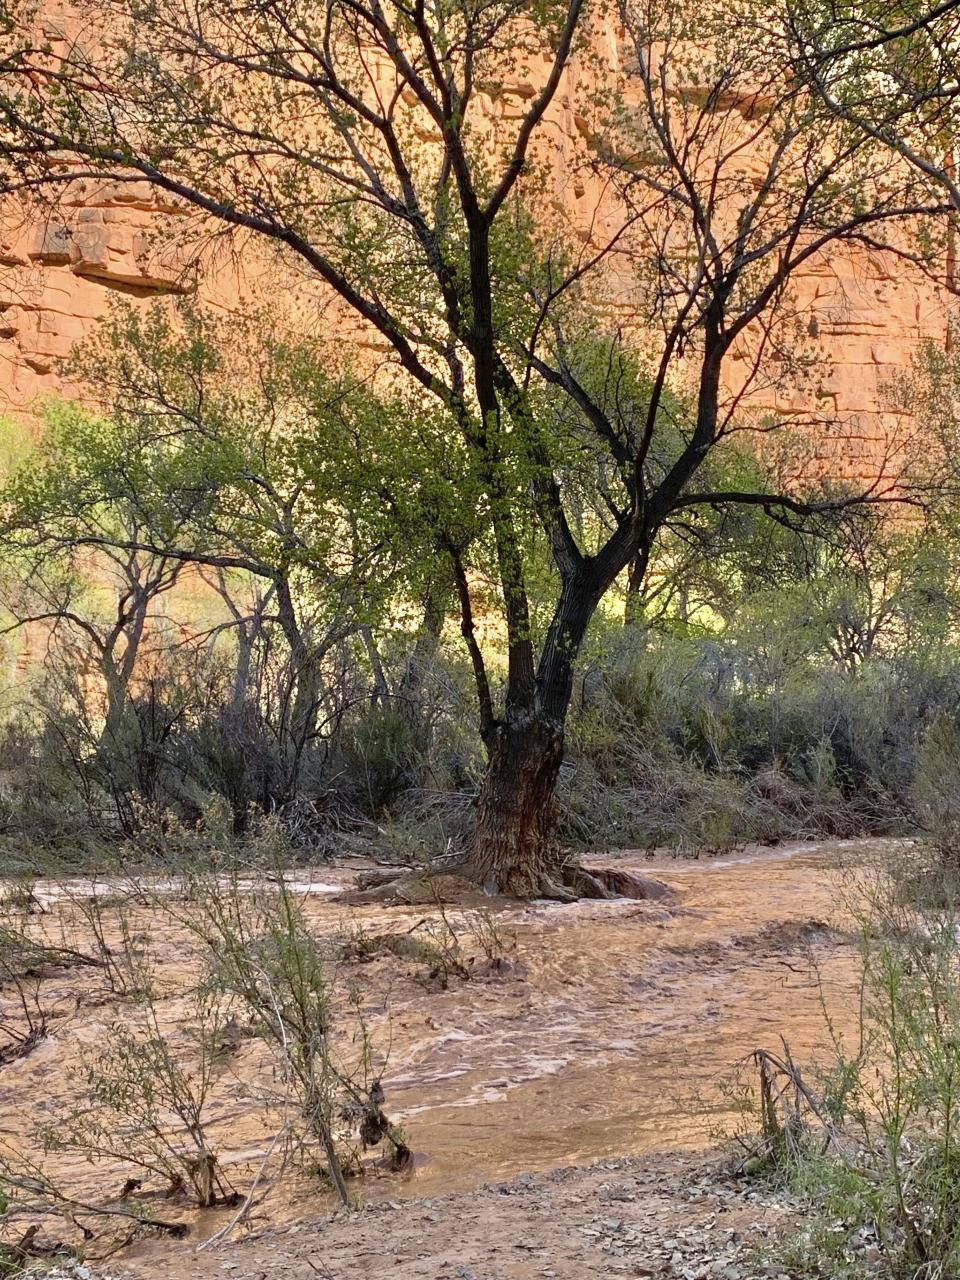 In this photo provided by Shannon Castellano, floodwaters, which washed away a bridge to a campground, flow through the Havasupai Indian Reservation in Arizona on Friday, March 17, 2023. (Shannon Castellano via AP)